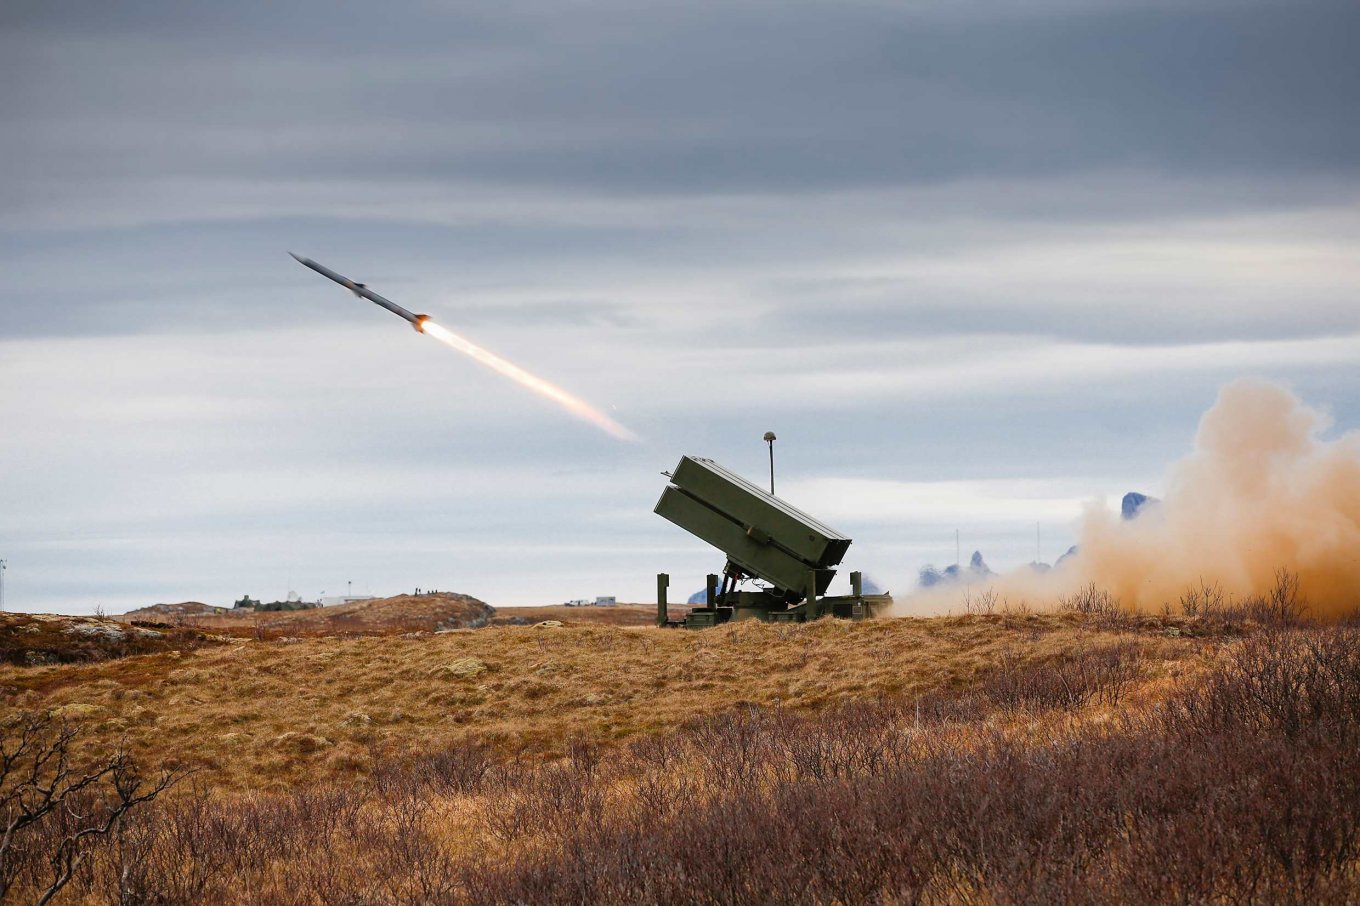 The U.S. began the process of purchasing NASAMS air defense systems for the Ukrainian Armed Forces